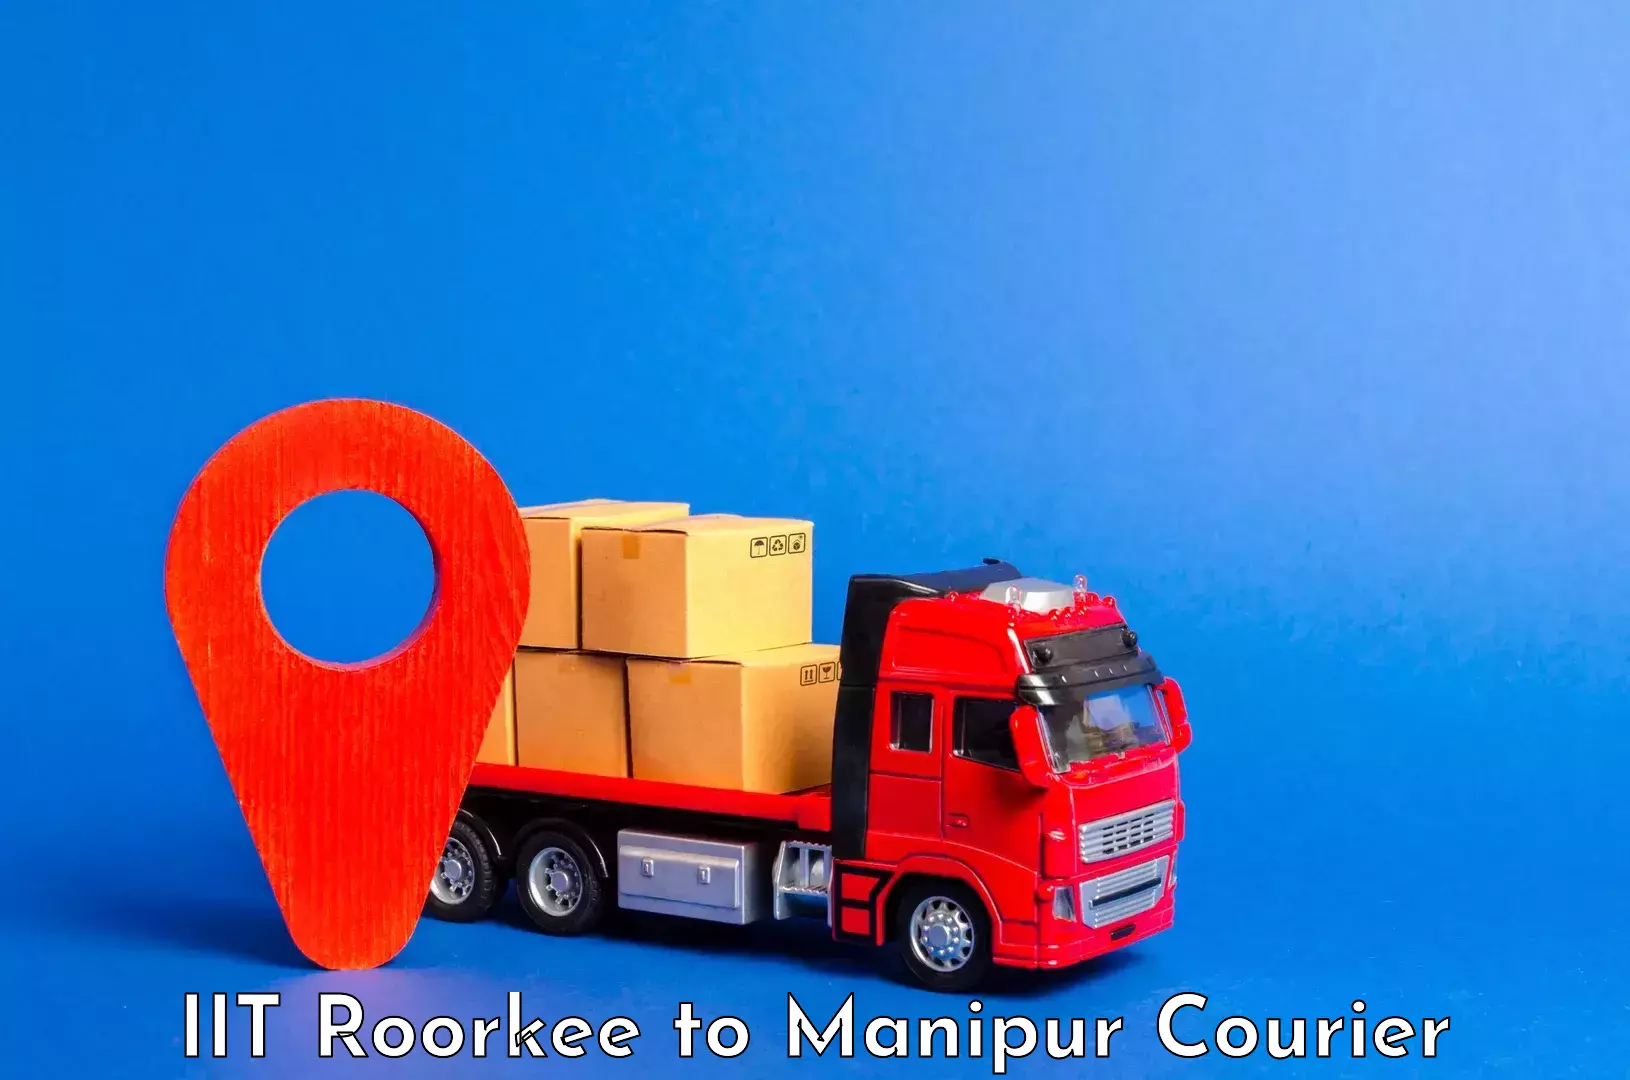 Luggage transfer service IIT Roorkee to Tamenglong